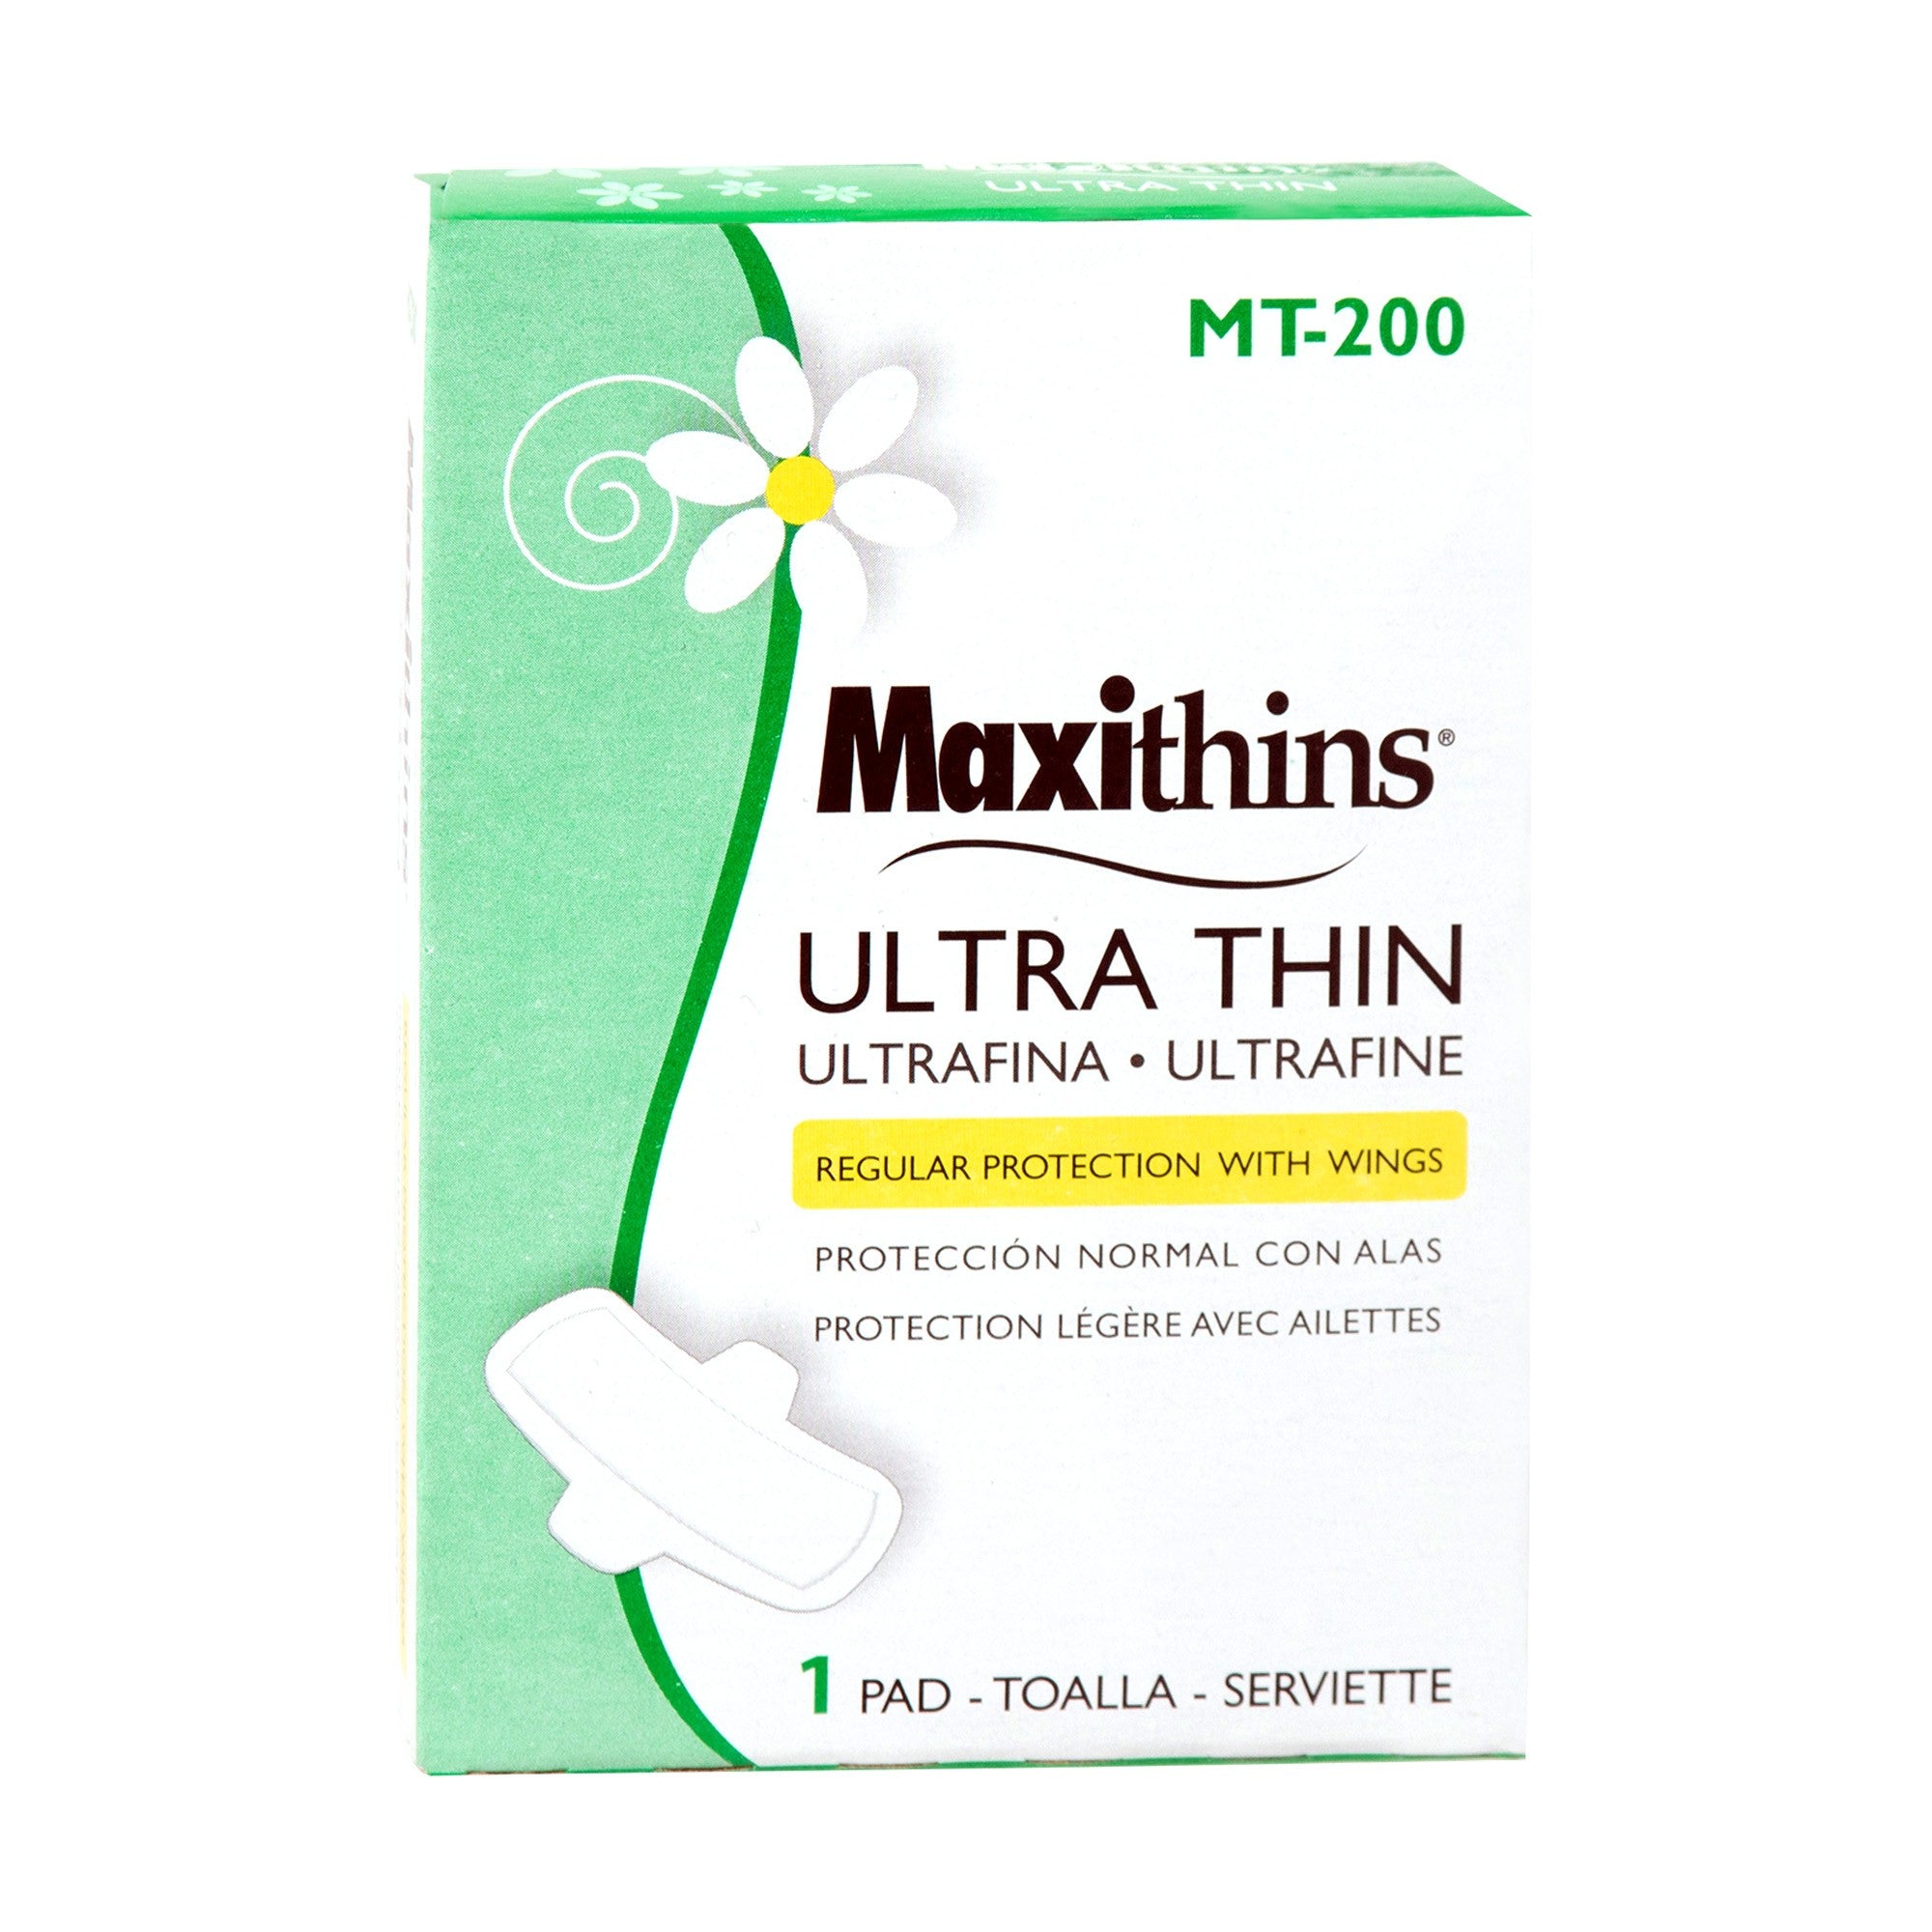 Buy Wholesale Maxithins® Ultra Thin with Wings - MT